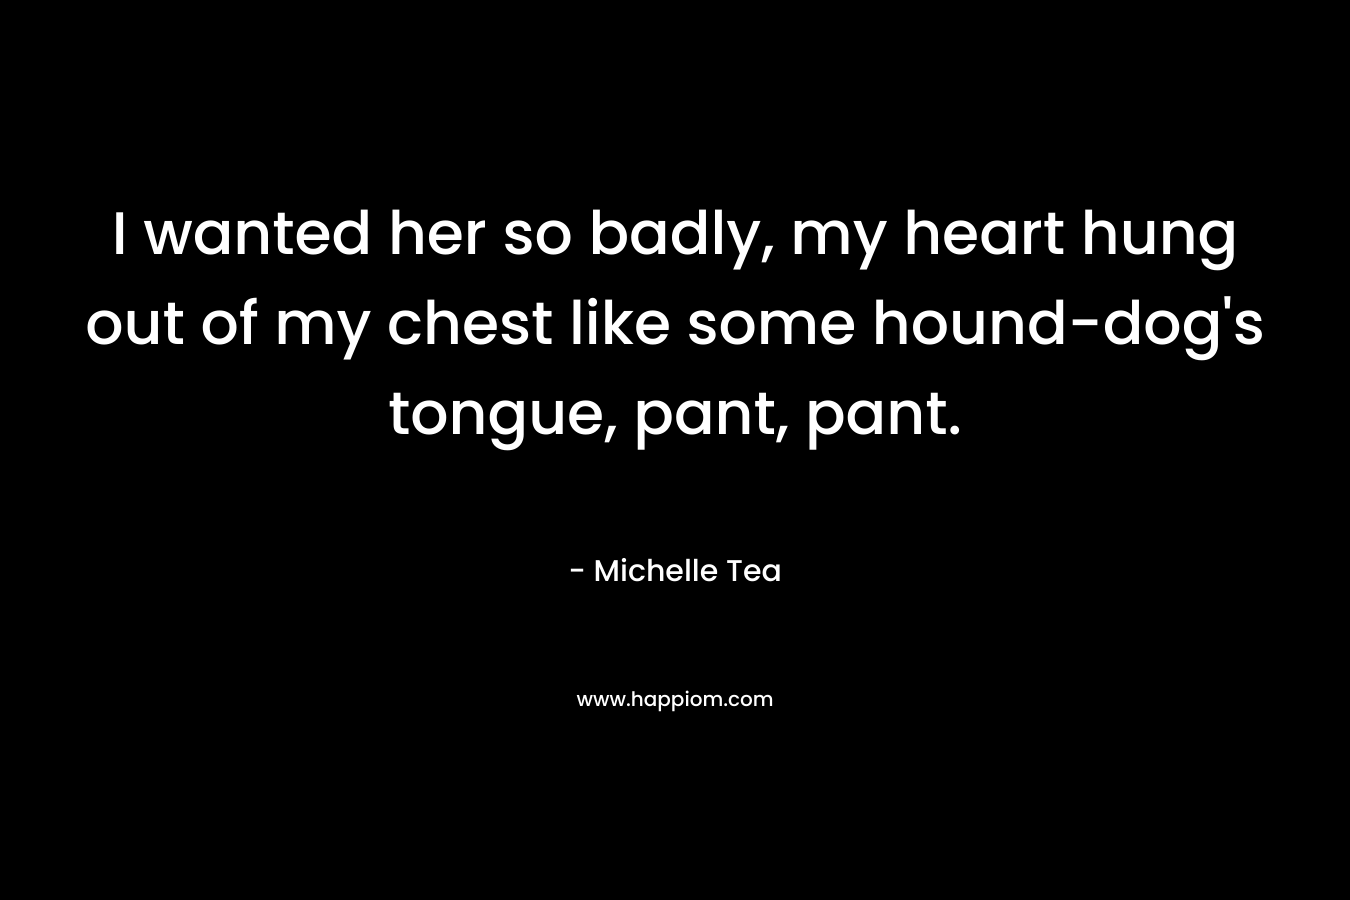 I wanted her so badly, my heart hung out of my chest like some hound-dog’s tongue, pant, pant. – Michelle Tea